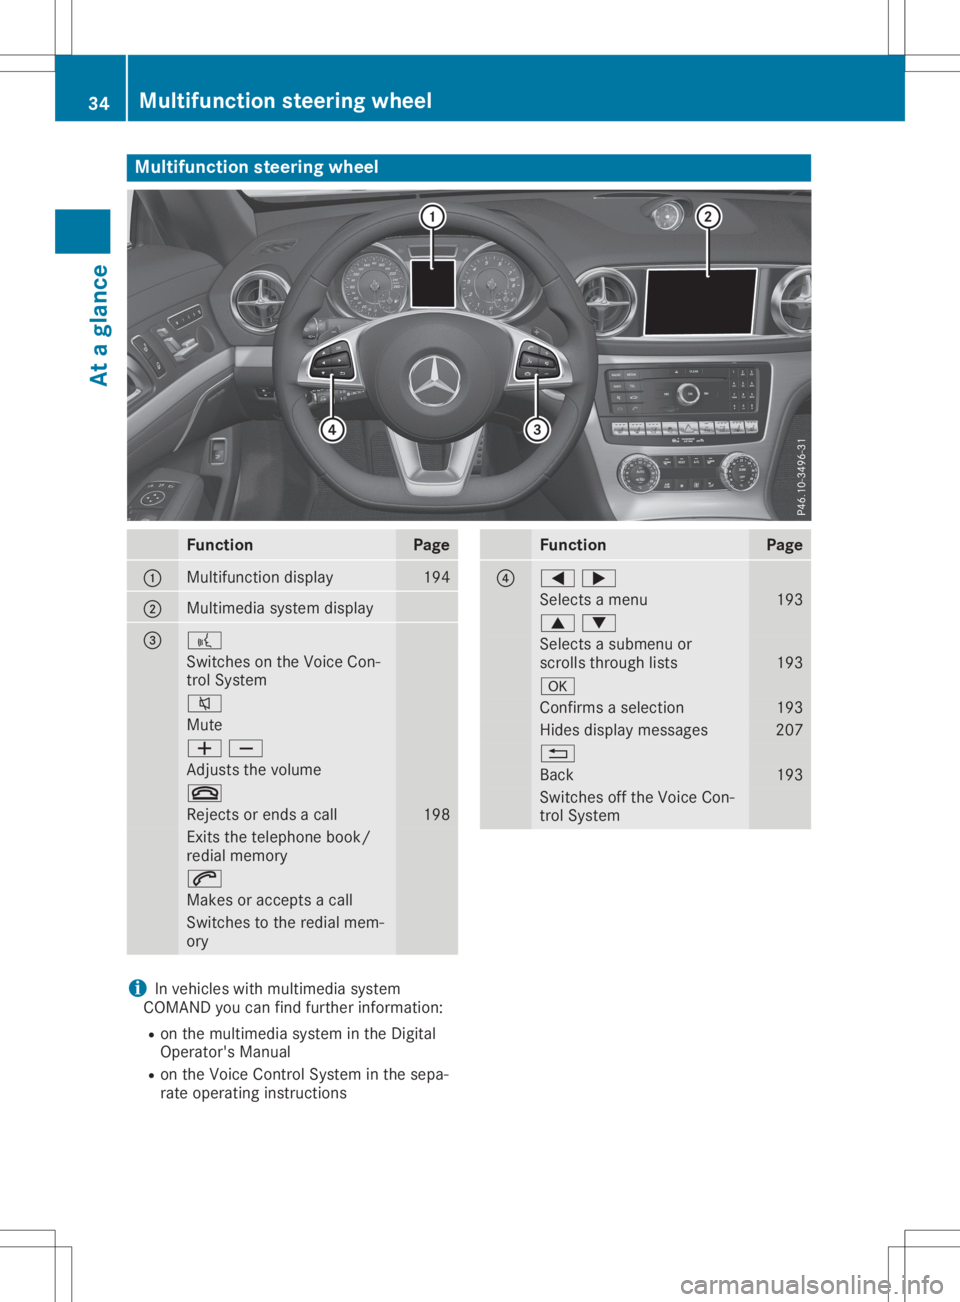 MERCEDES-BENZ SL CLASS 2020  Owners Manual Multifunc
tionsteering wheel Func
tion Page
0043
Mul
tifunction display 194
0044
Mul
timedi asystem display 0087 0059
Switches
onthe Voice Con-
trol System 0063
Mute
00810082
Adju
ststhe volum e 0076
